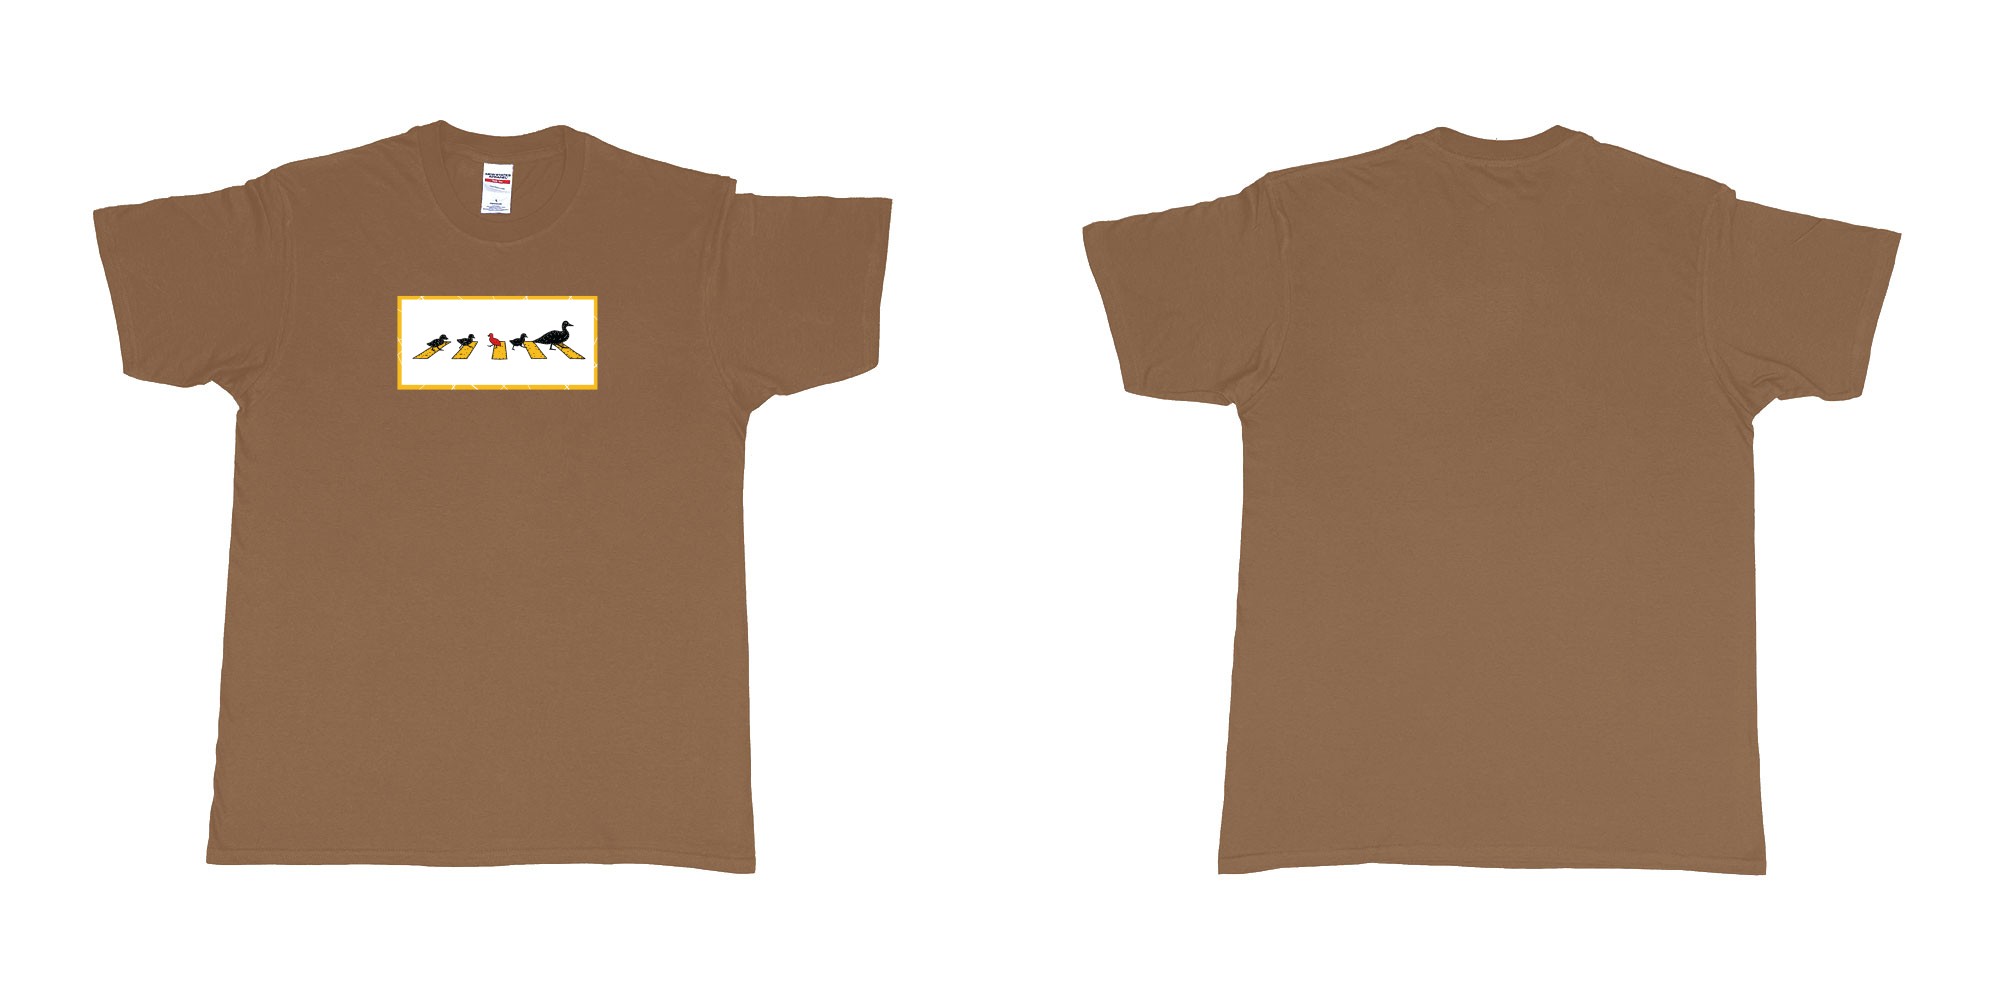 Custom tshirt design 4481 ducks in fabric color chestnut choice your own text made in Bali by The Pirate Way